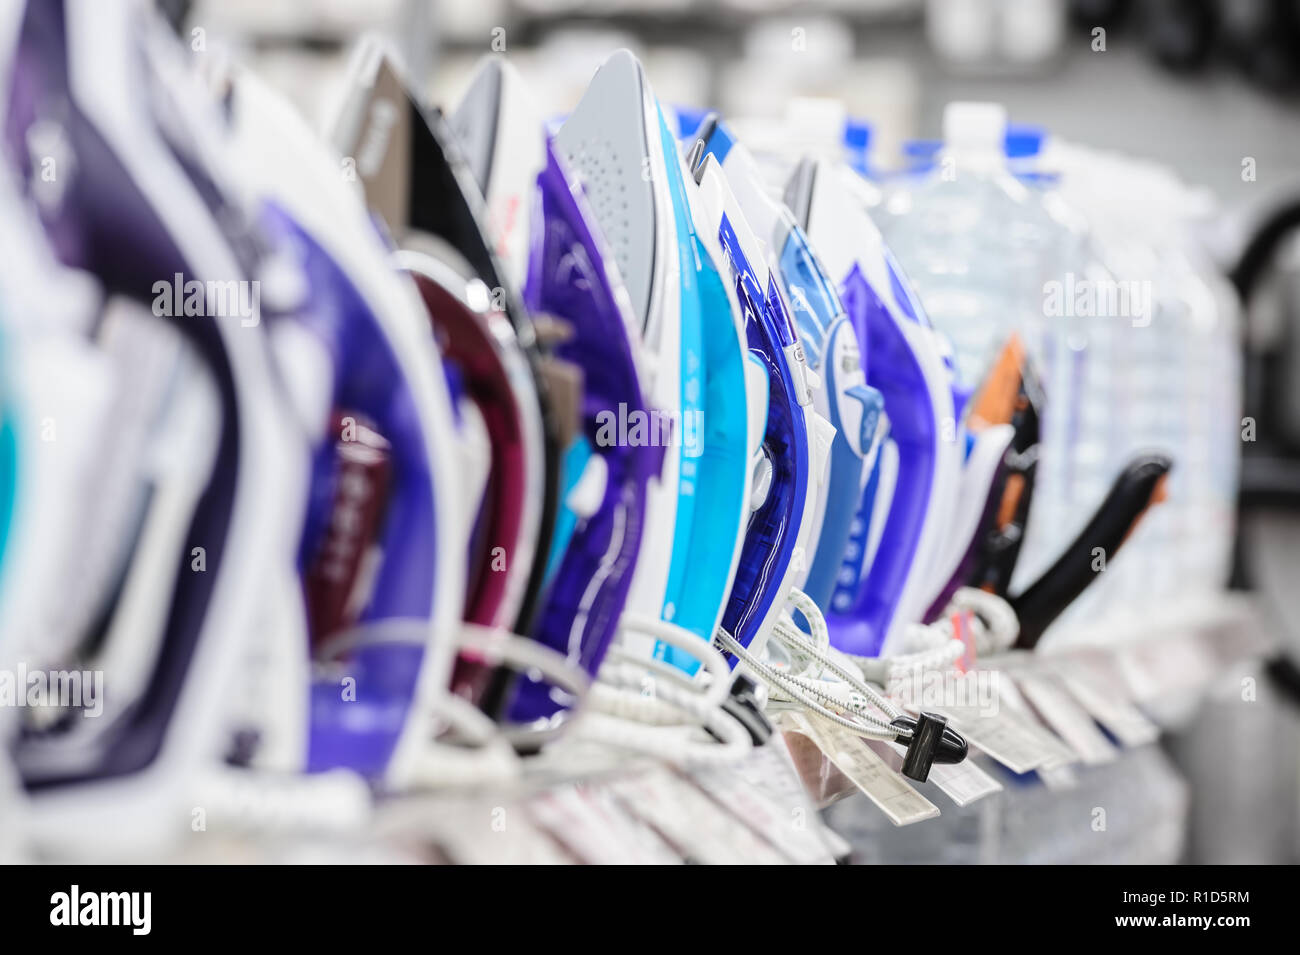 row of electric irons in retail store Stock Photo